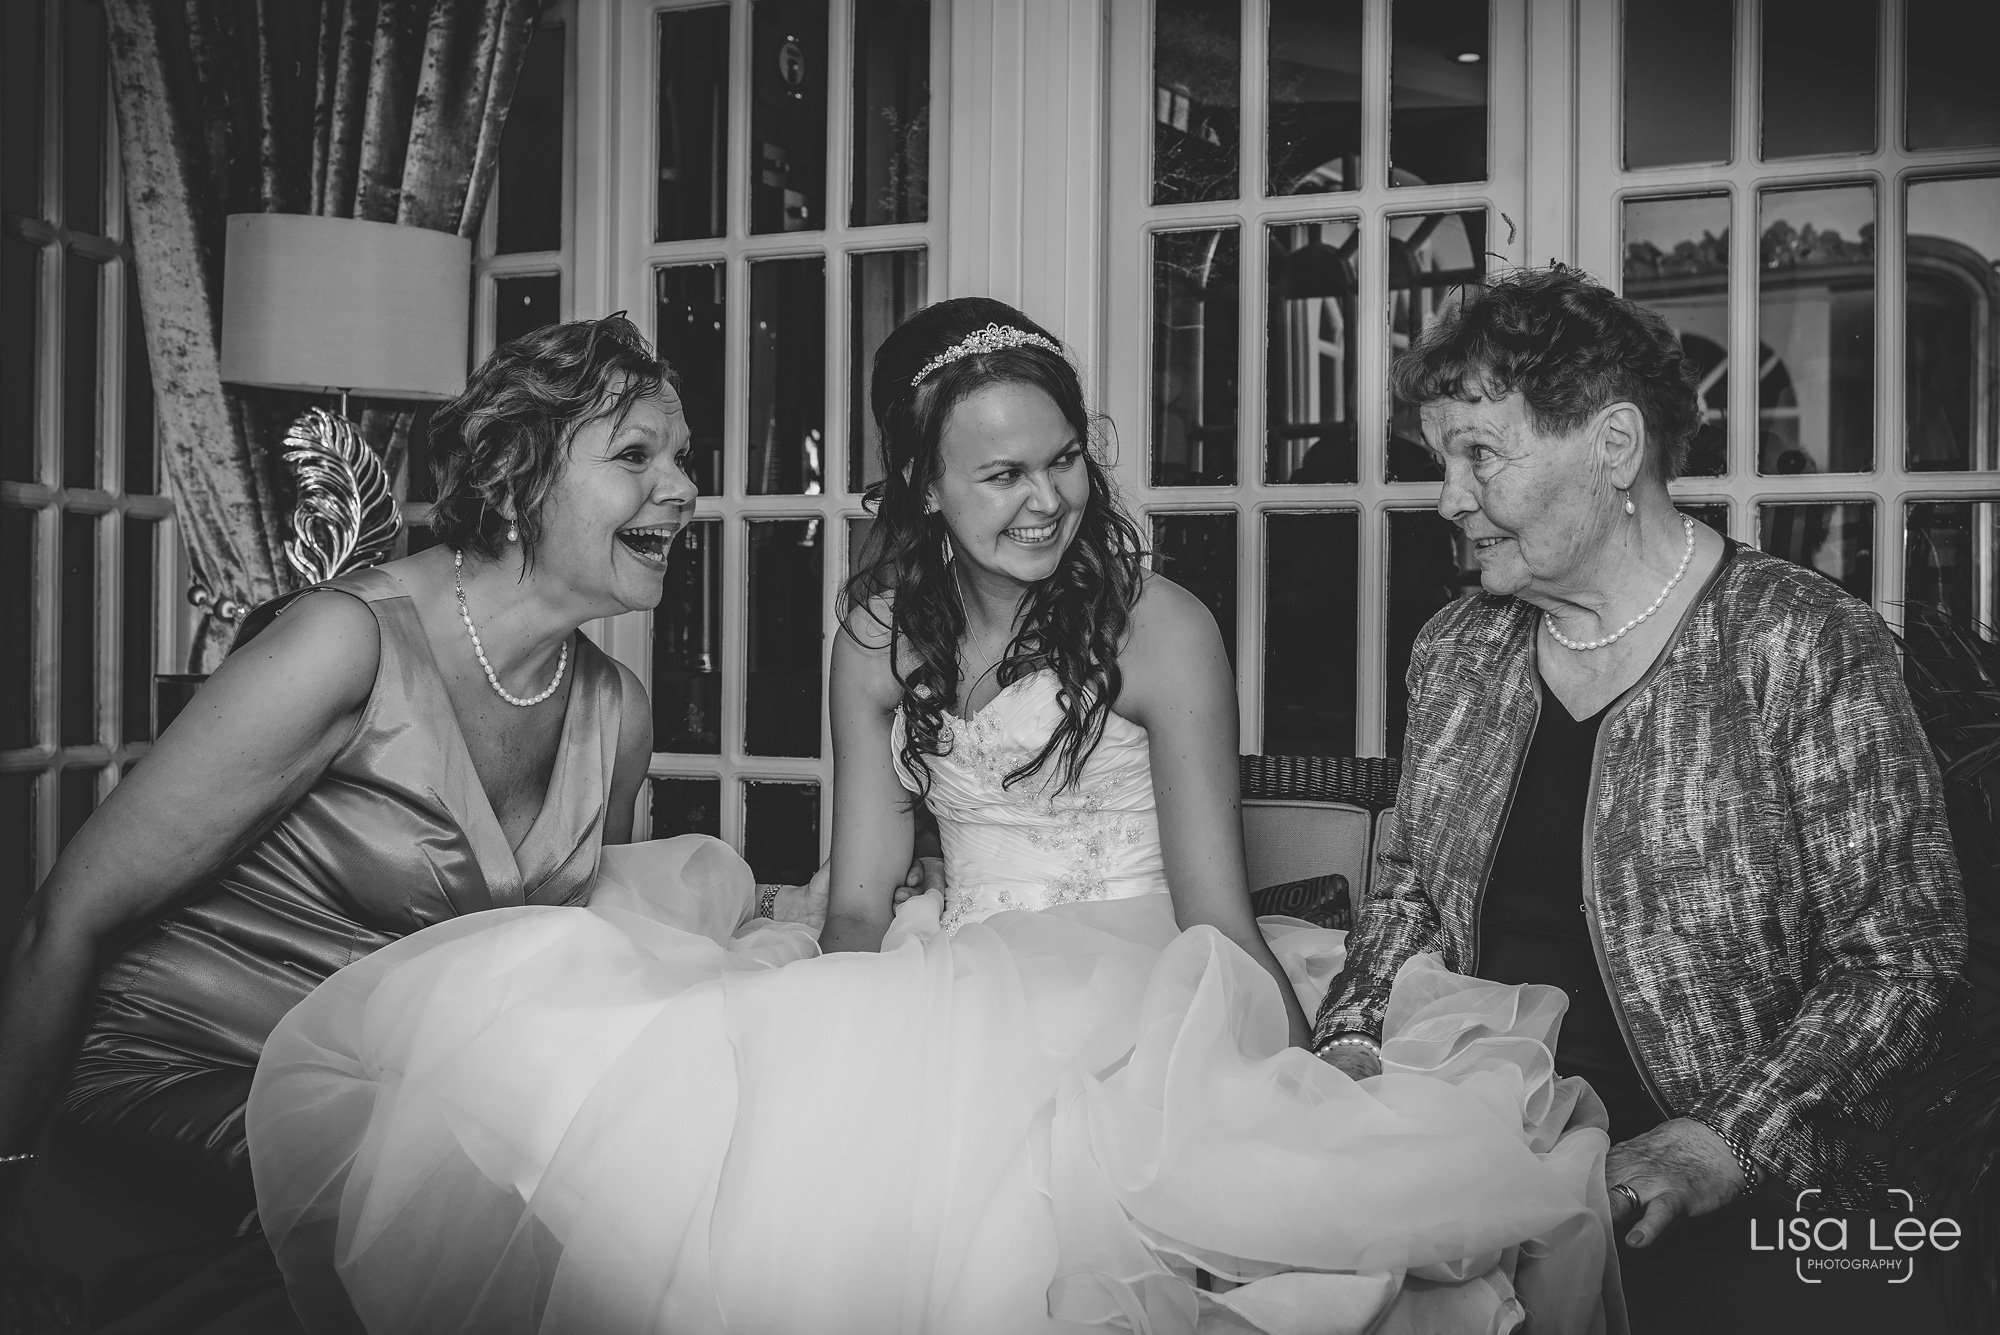 Lord-Bute-Hotel-Lisa-Lee-Documentary-Wedding-Photography-party-10.jpg